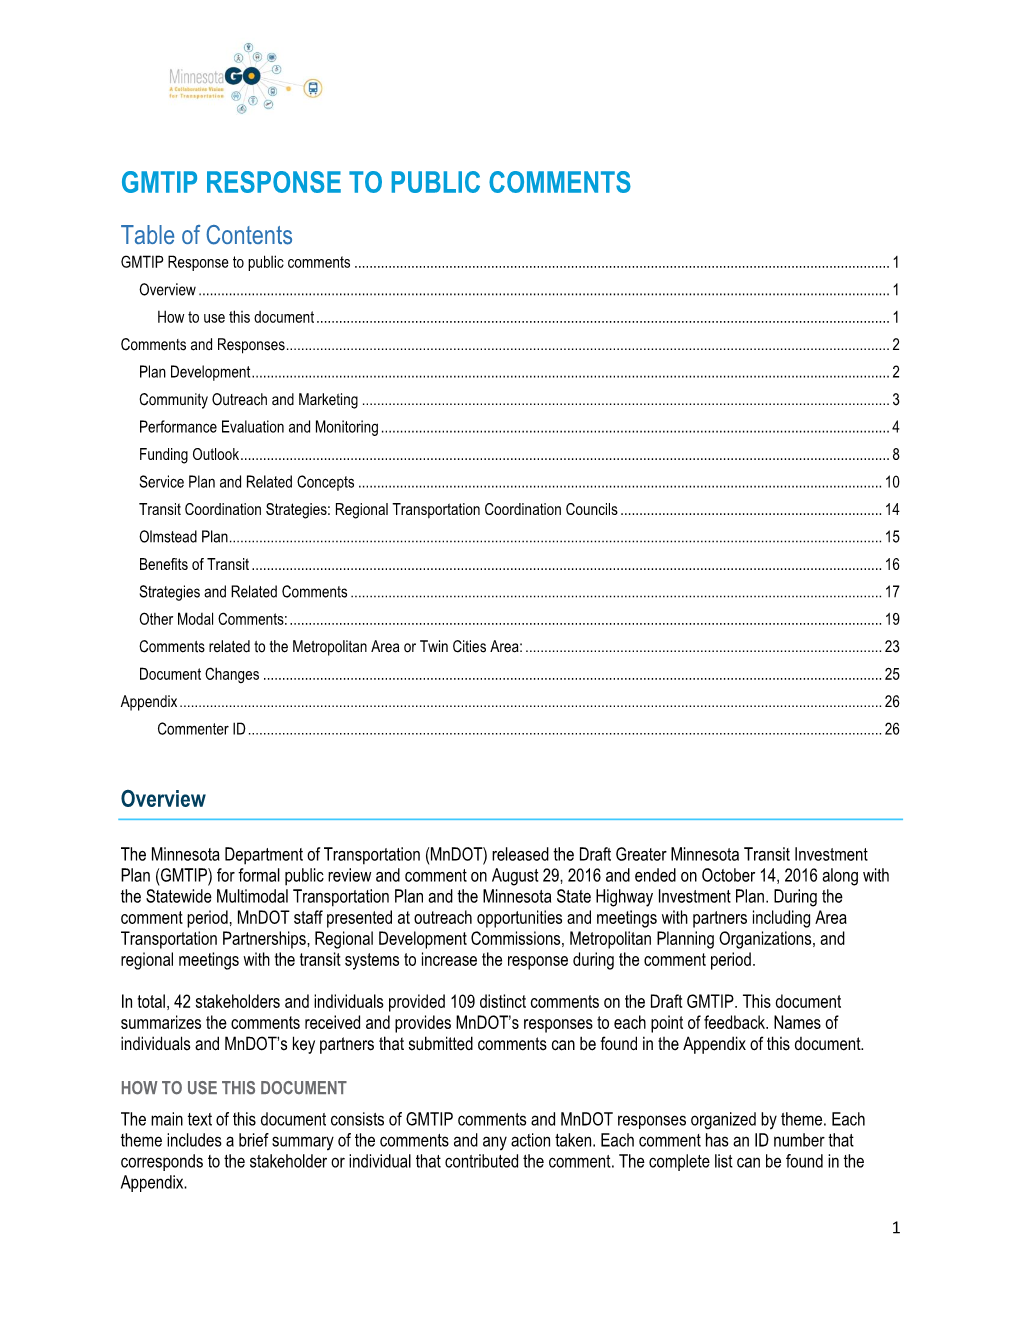 GMTIP RESPONSE to PUBLIC COMMENTS Table of Contents GMTIP Response to Public Comments